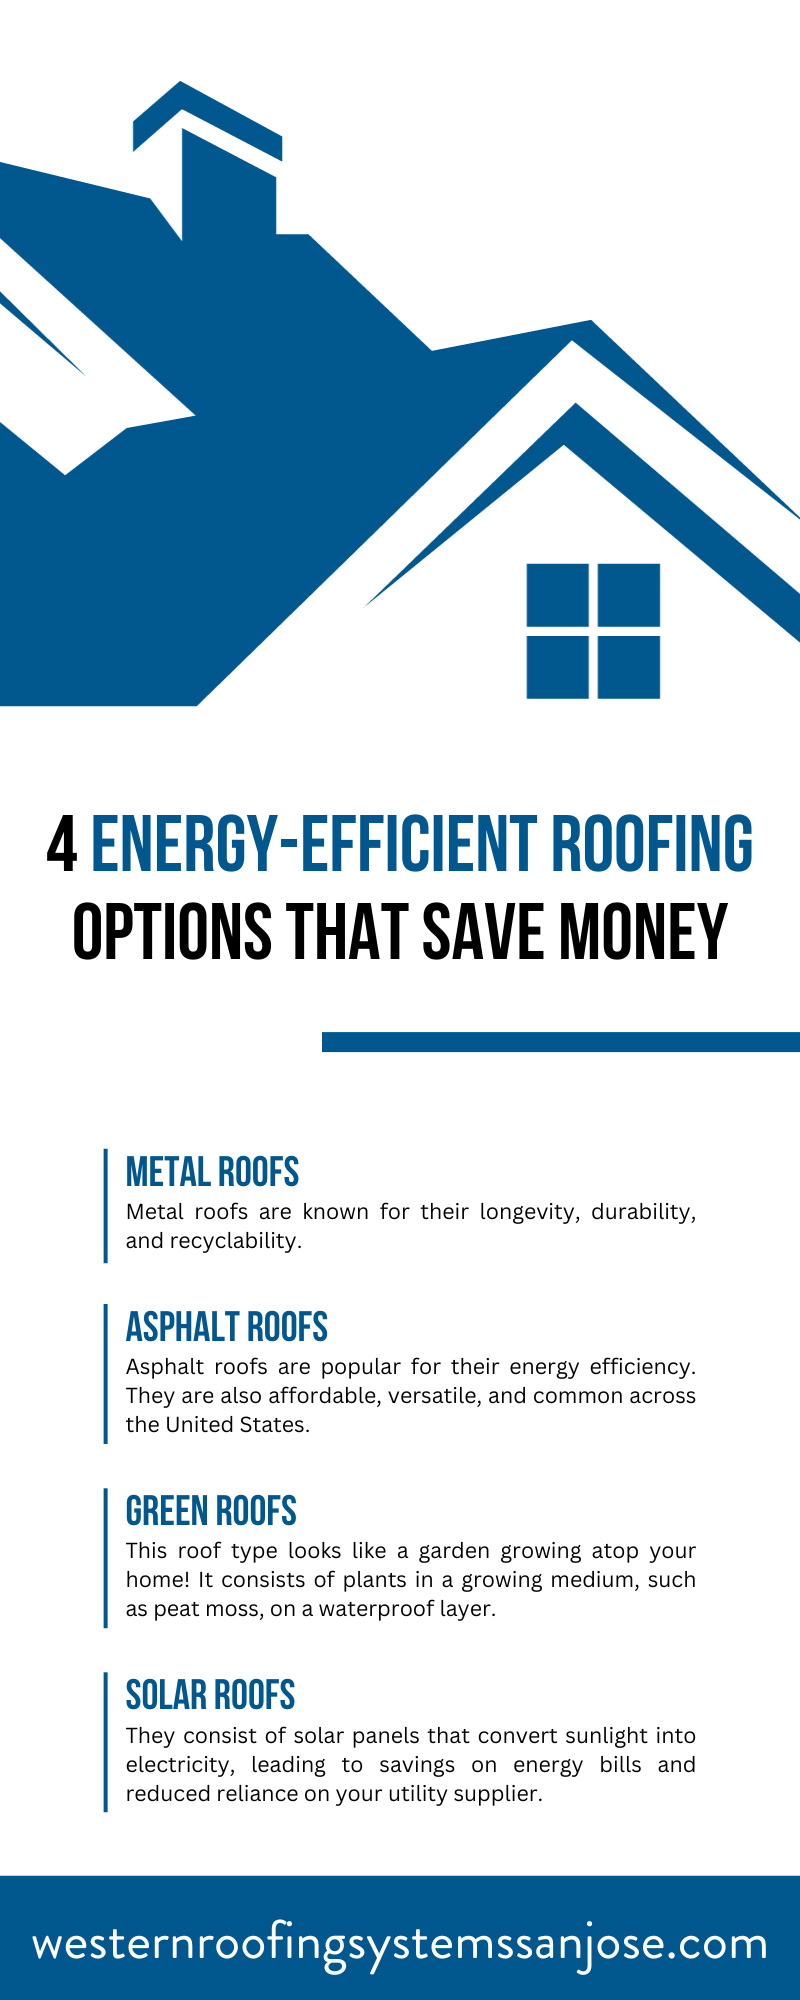 4 Energy-Efficient Roofing Options That Save Money